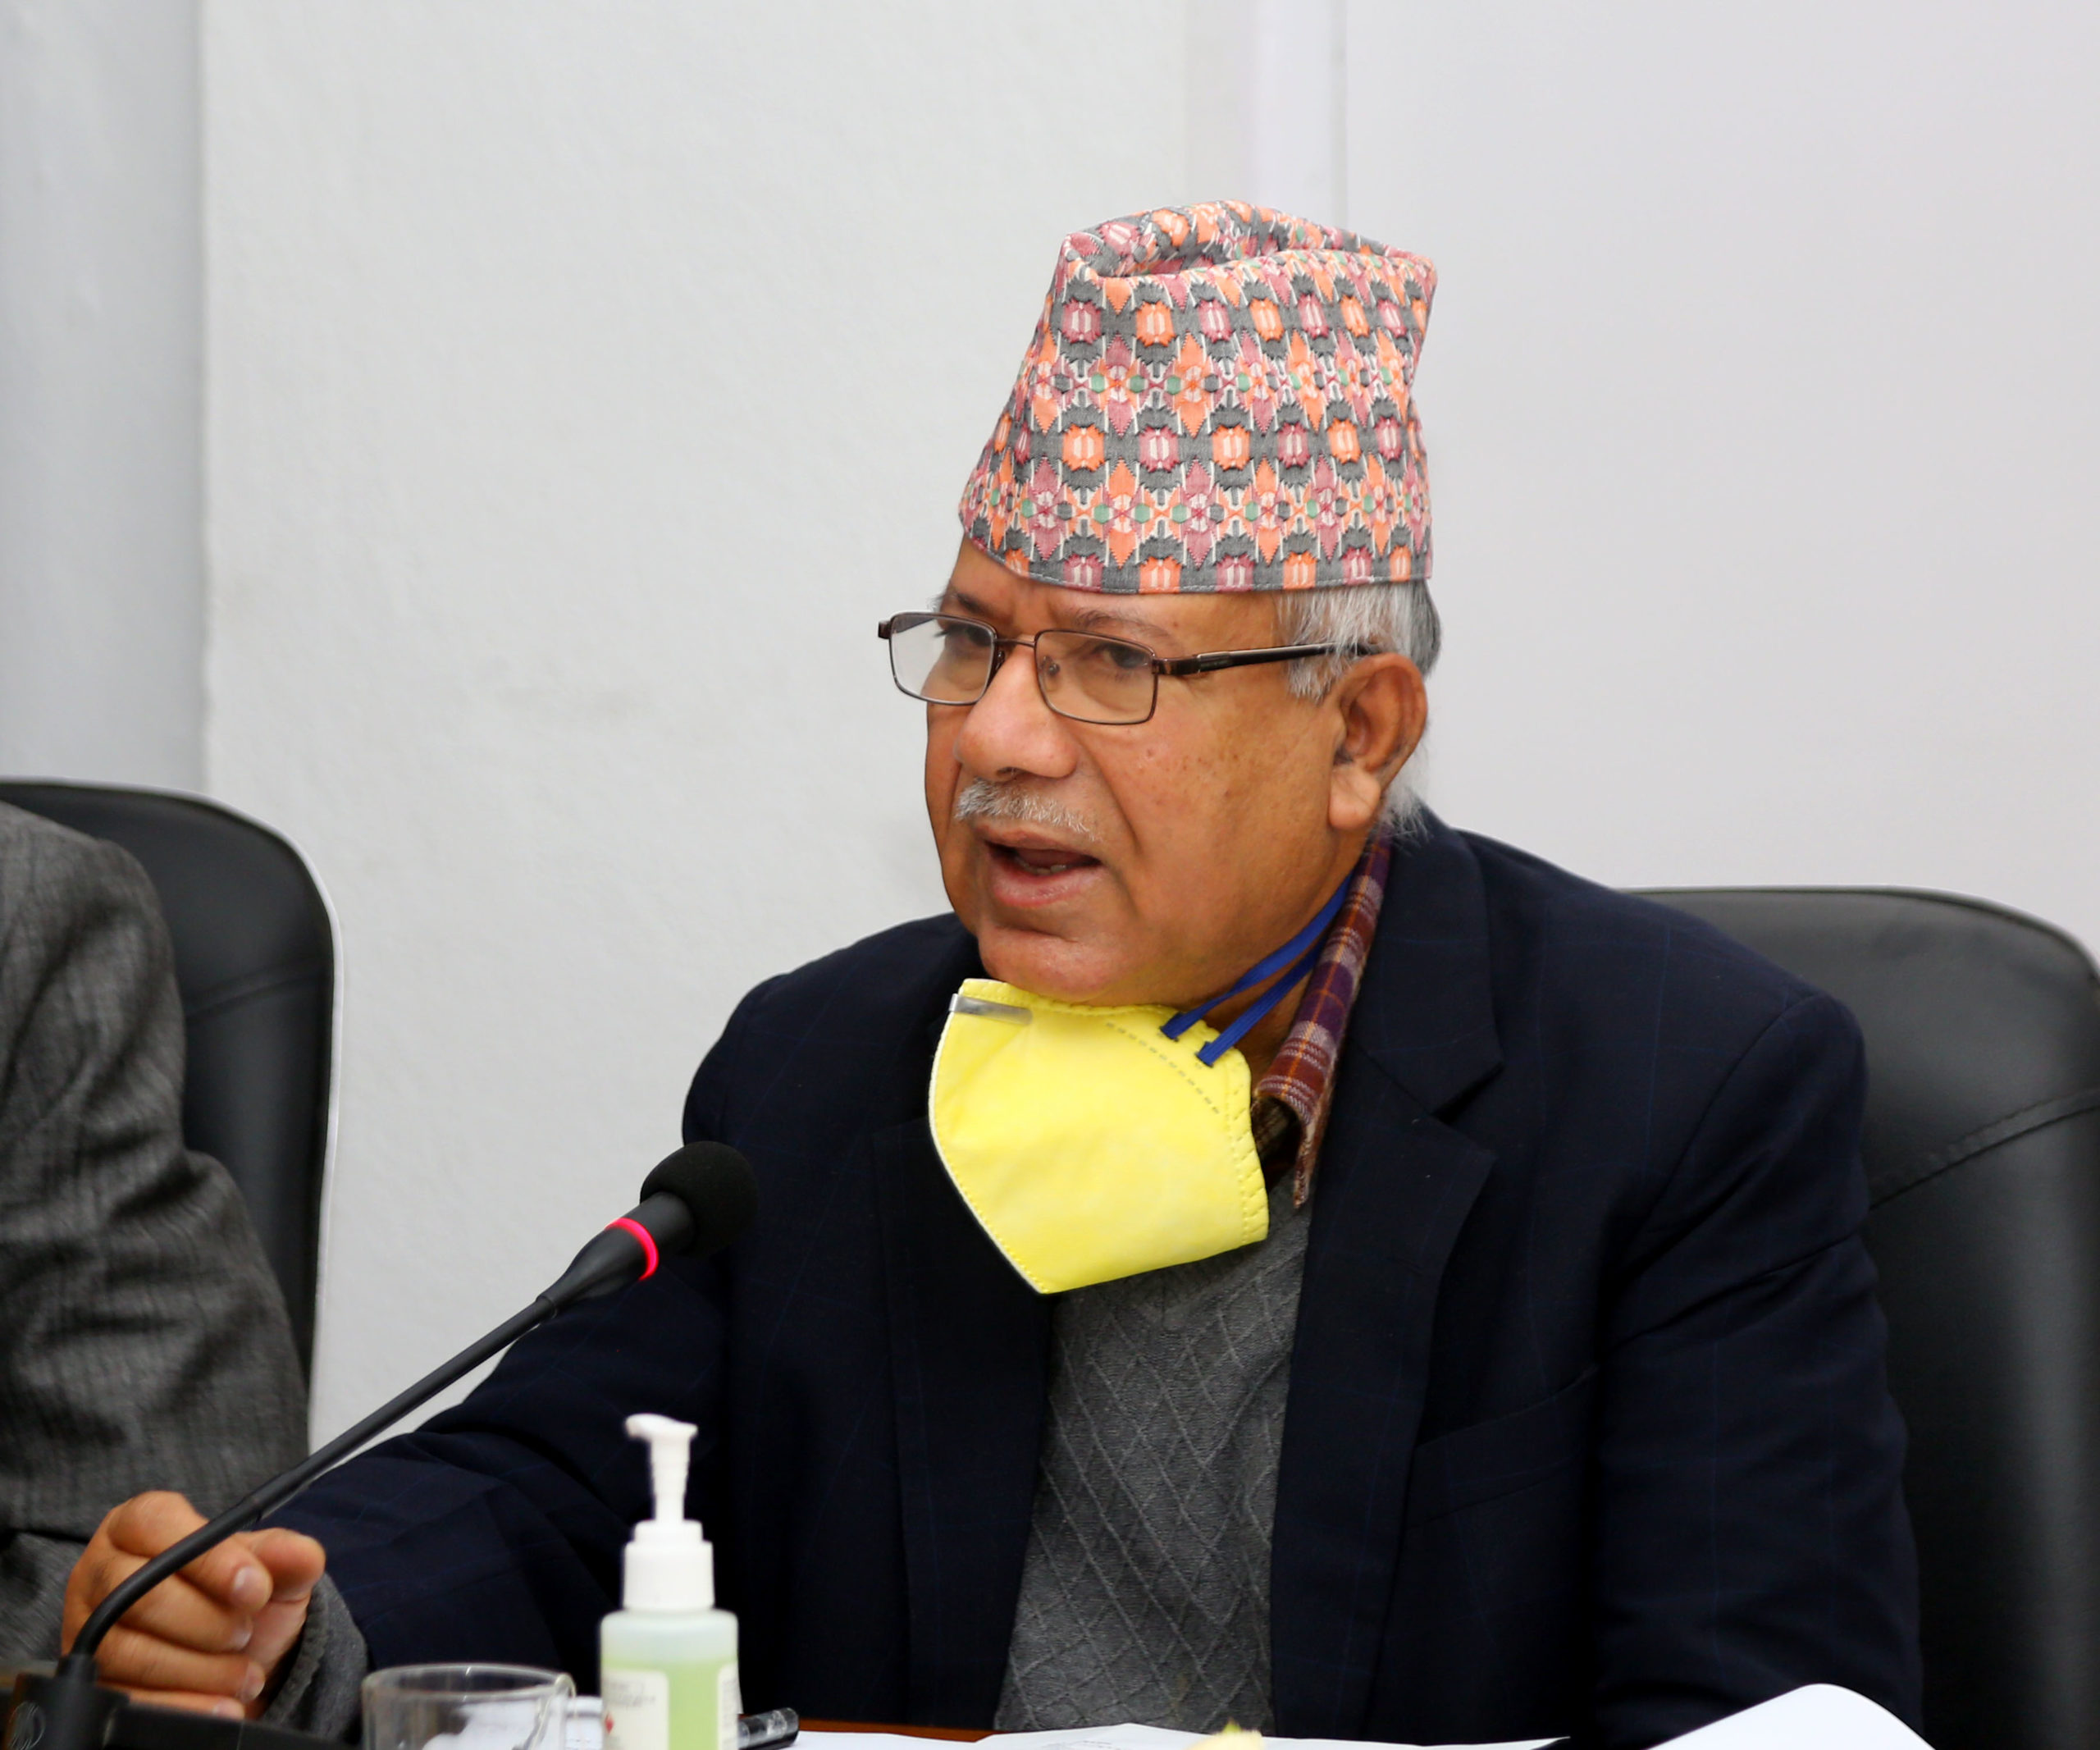 Unified Socialist Chair Nepal warns not to be deceived by Oli’s 10-point unity deal